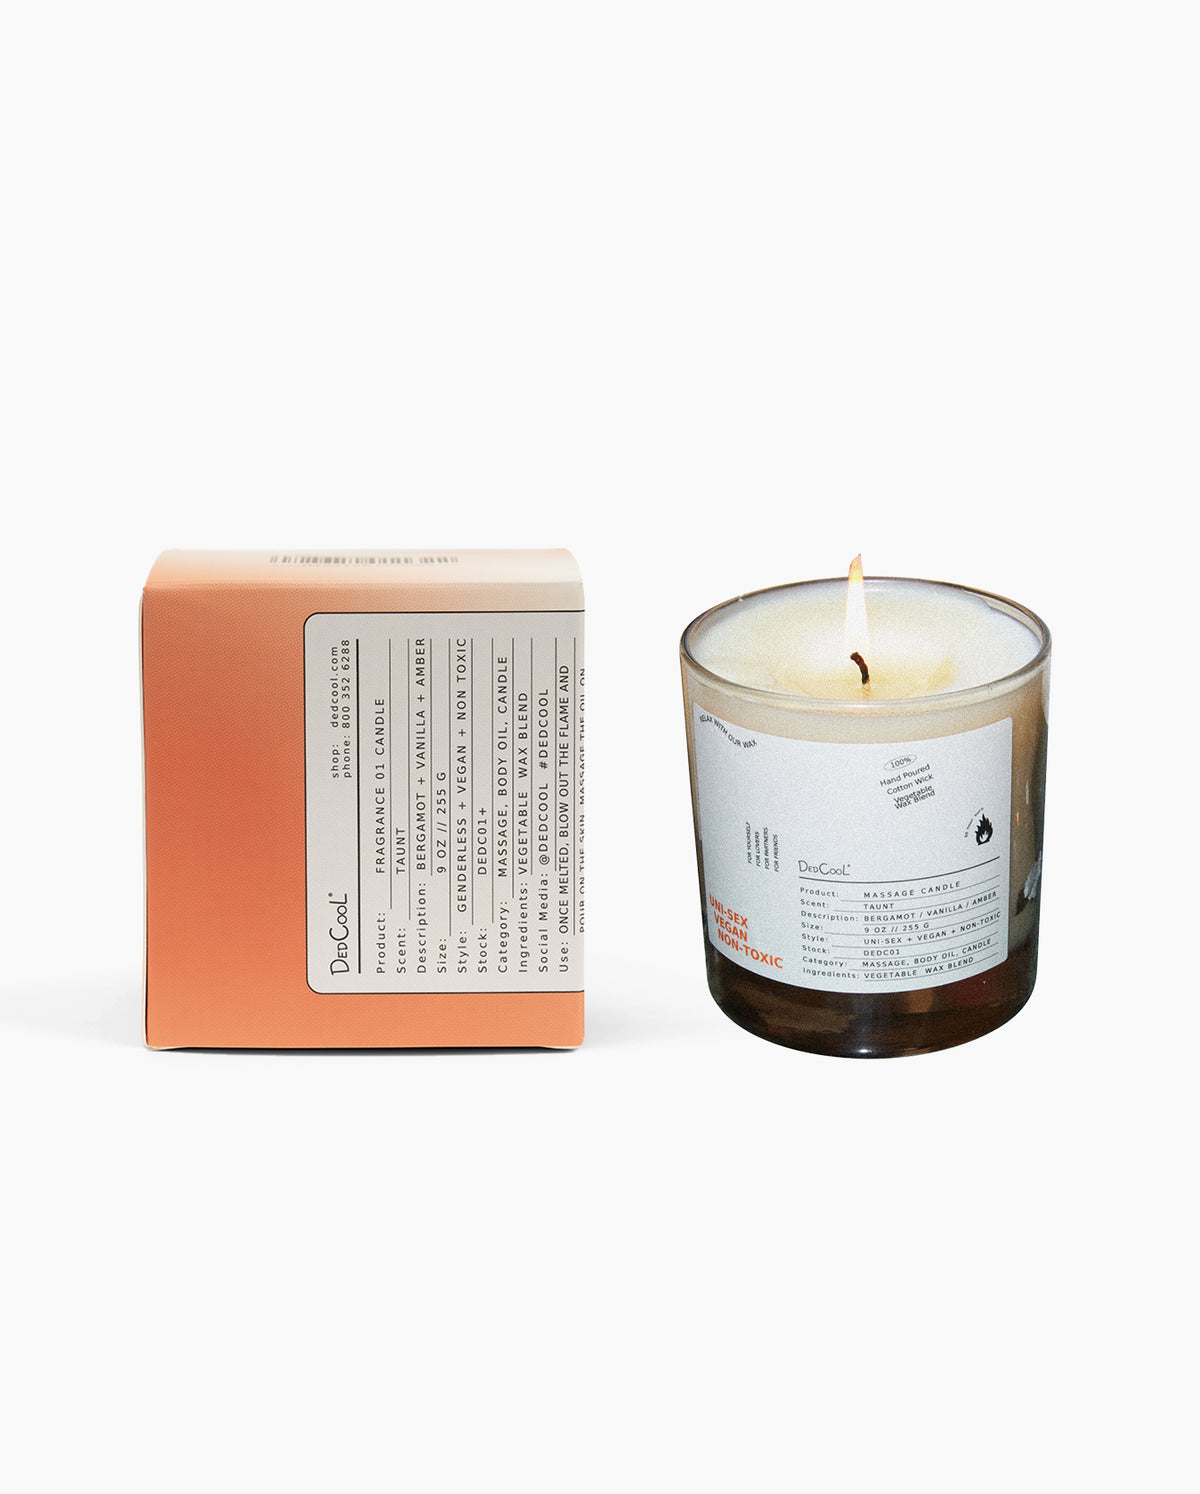 Dedcool Massage Candle 01 "Taunt"